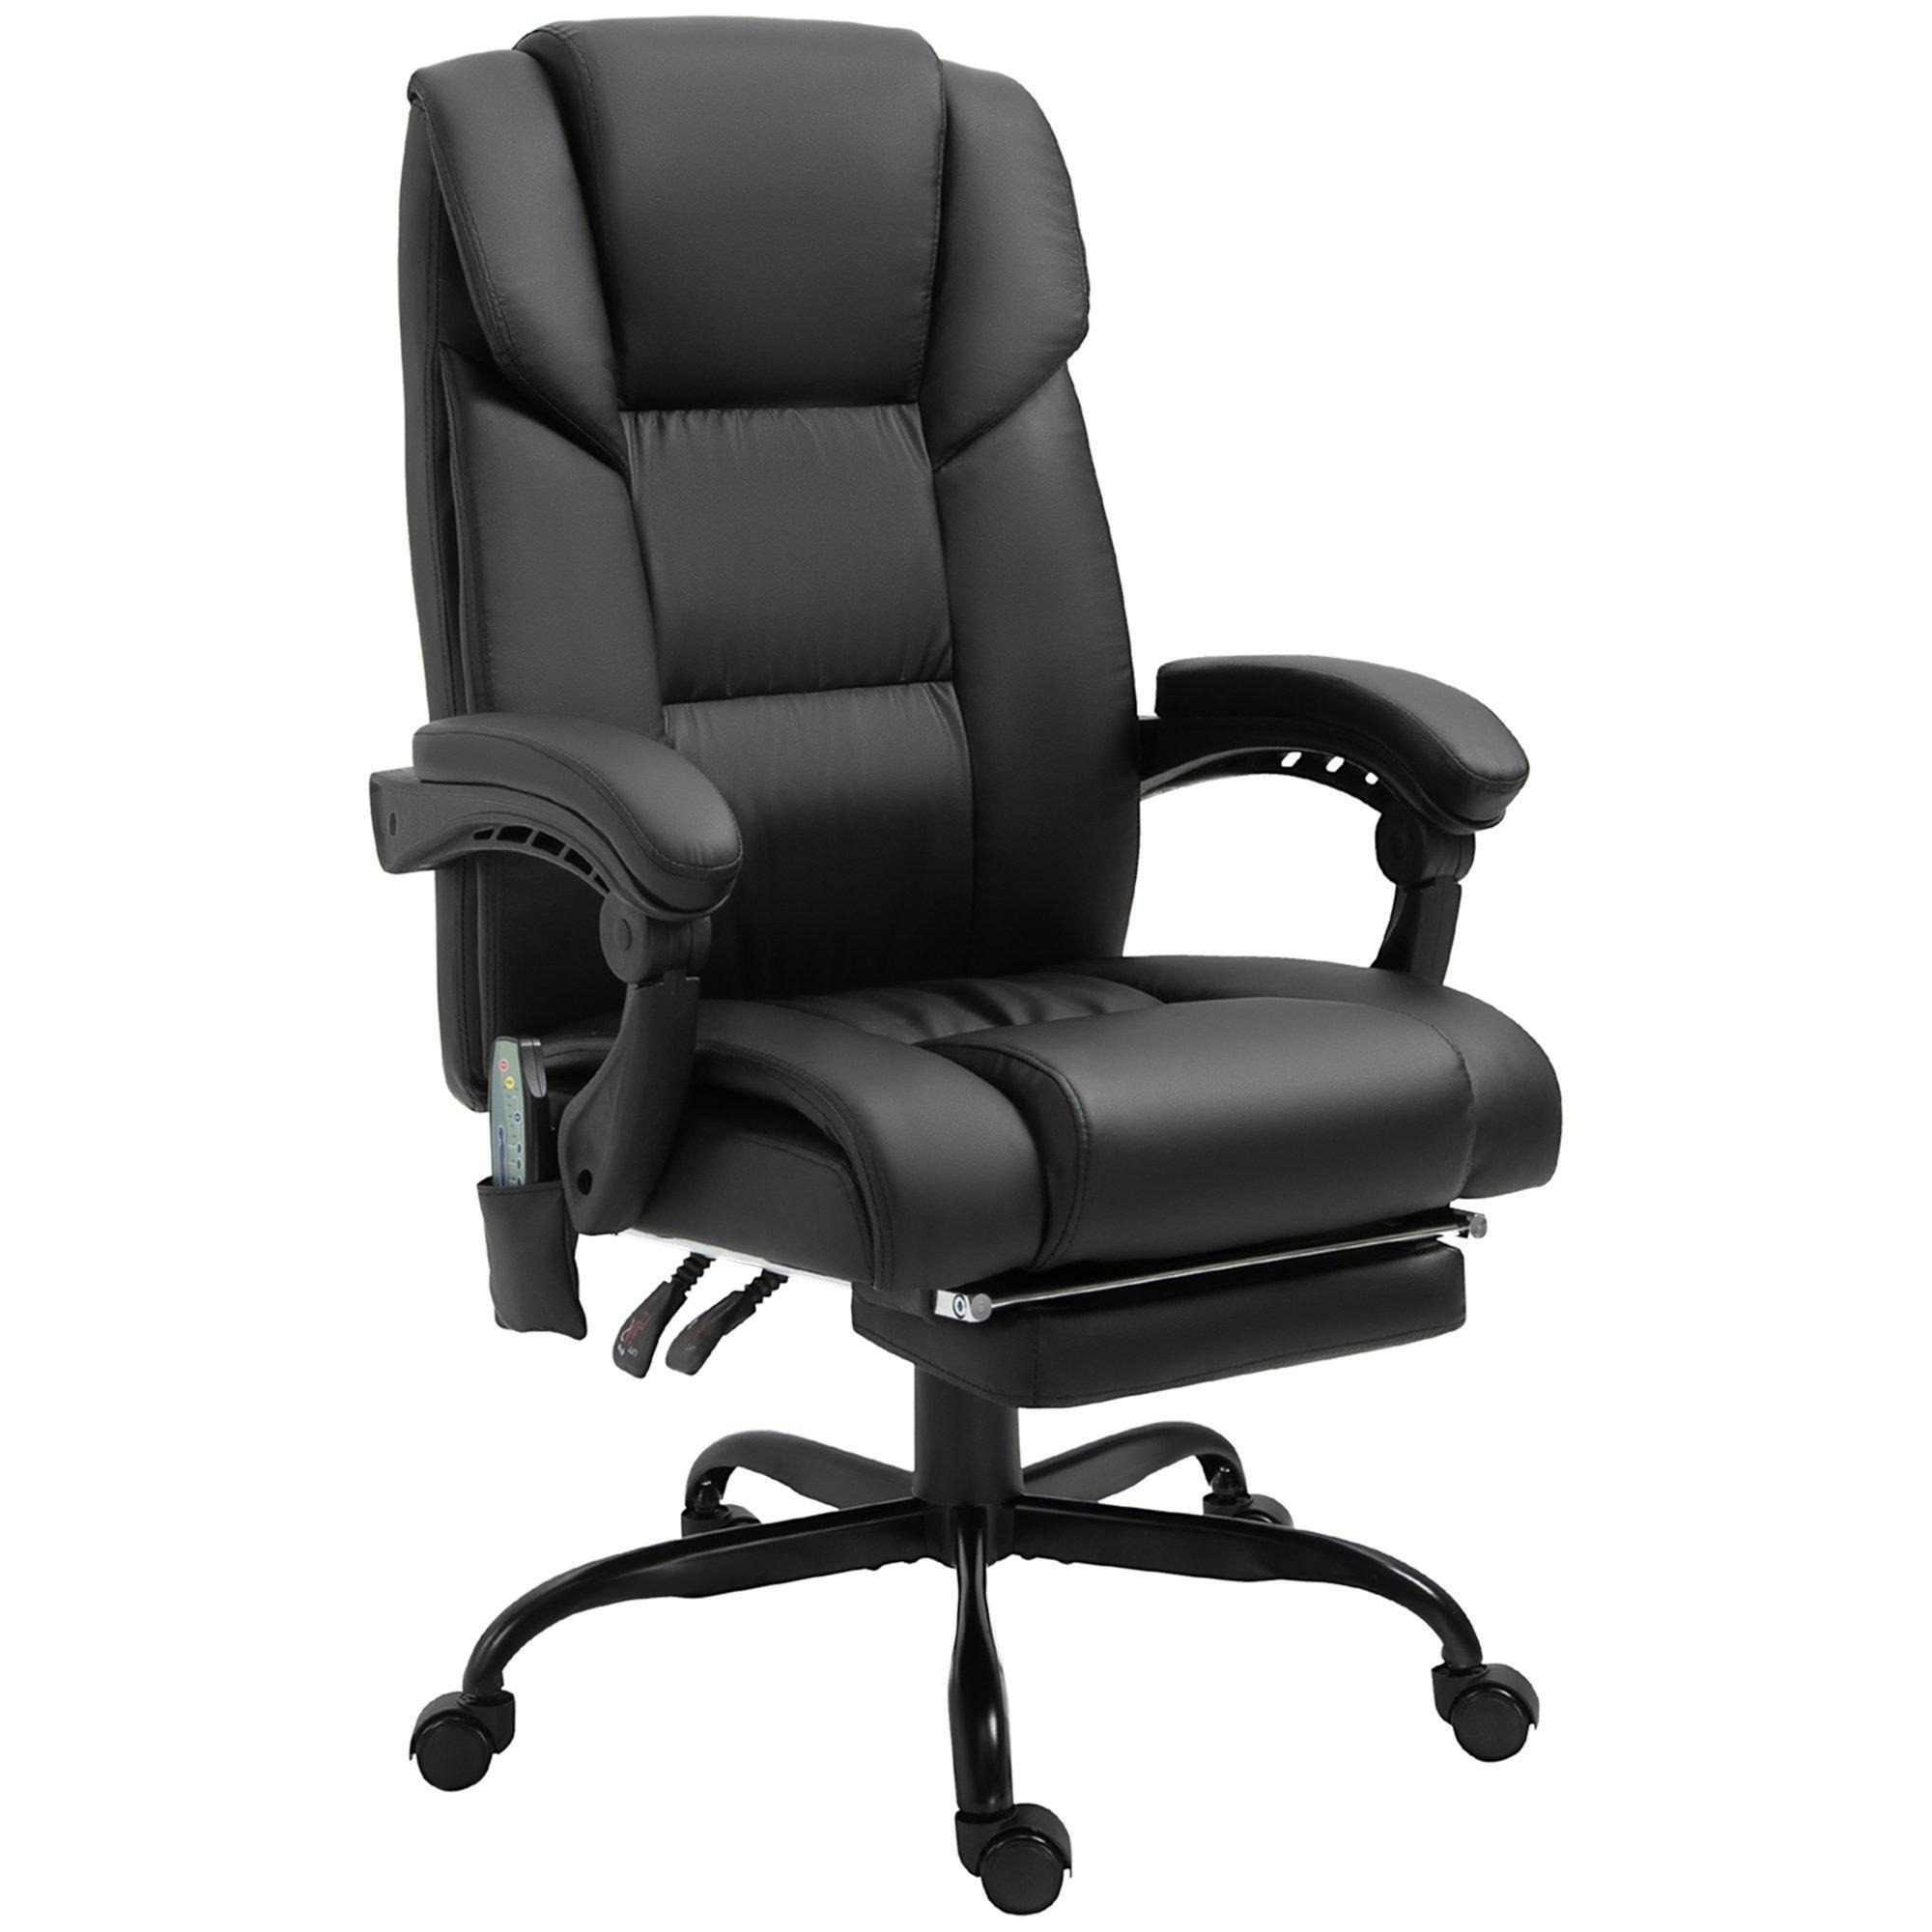 PU Leather Massage Office Chair with 6 Vibration Points Adjustable - image 1